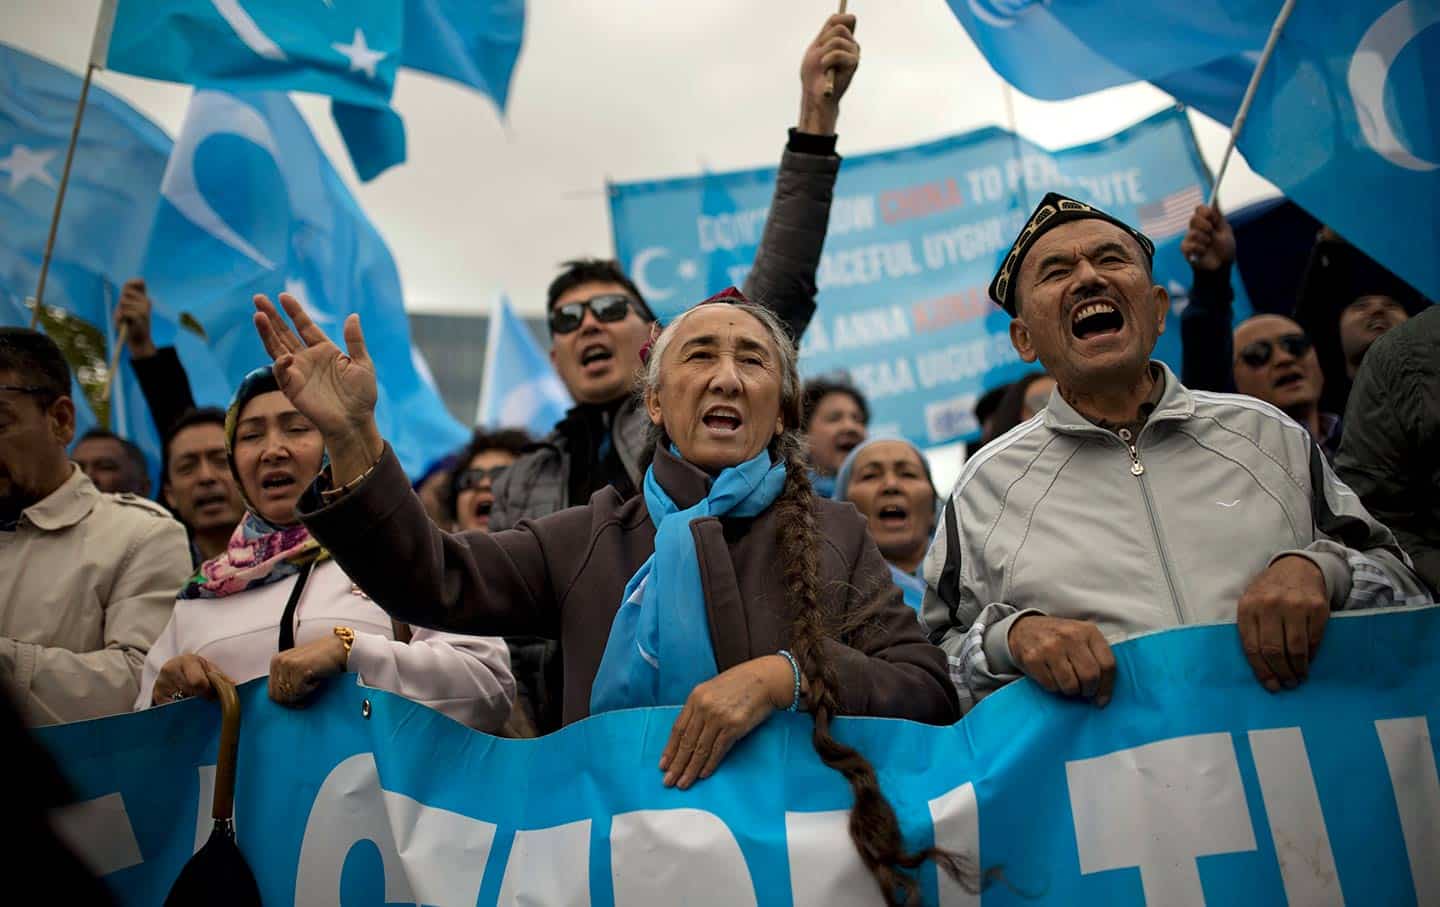 Episode 331: An Overview of the Uighur Conflict in China